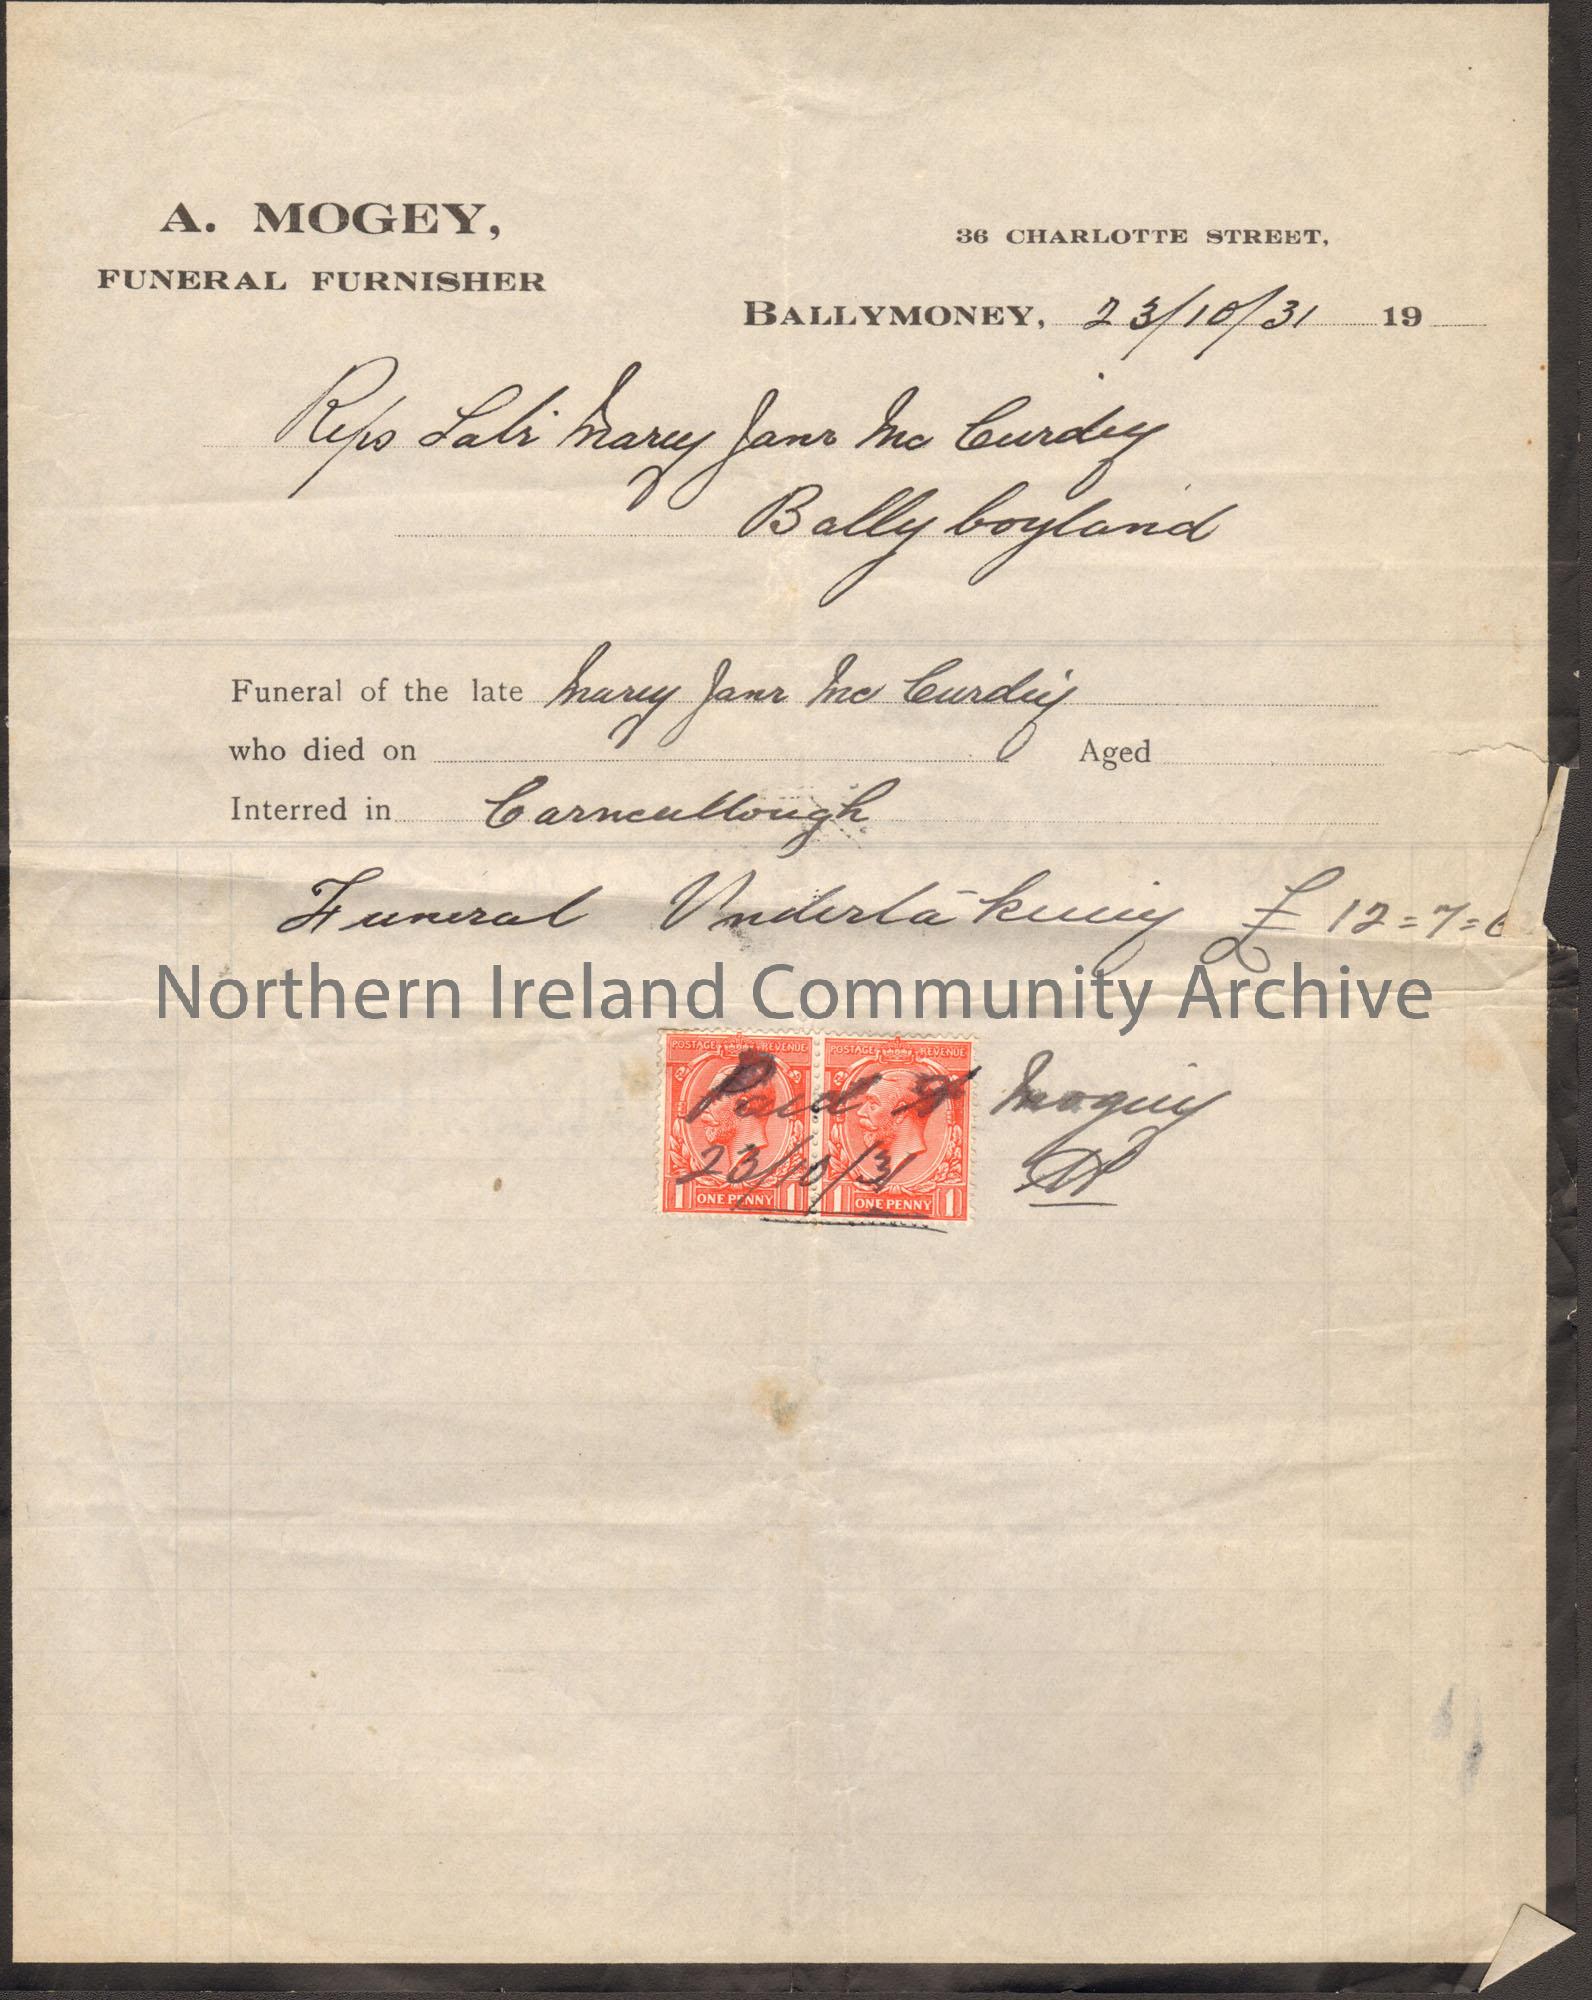 Invoice from A. Mogey, Funeral Furnisher on white paper with a black frame.